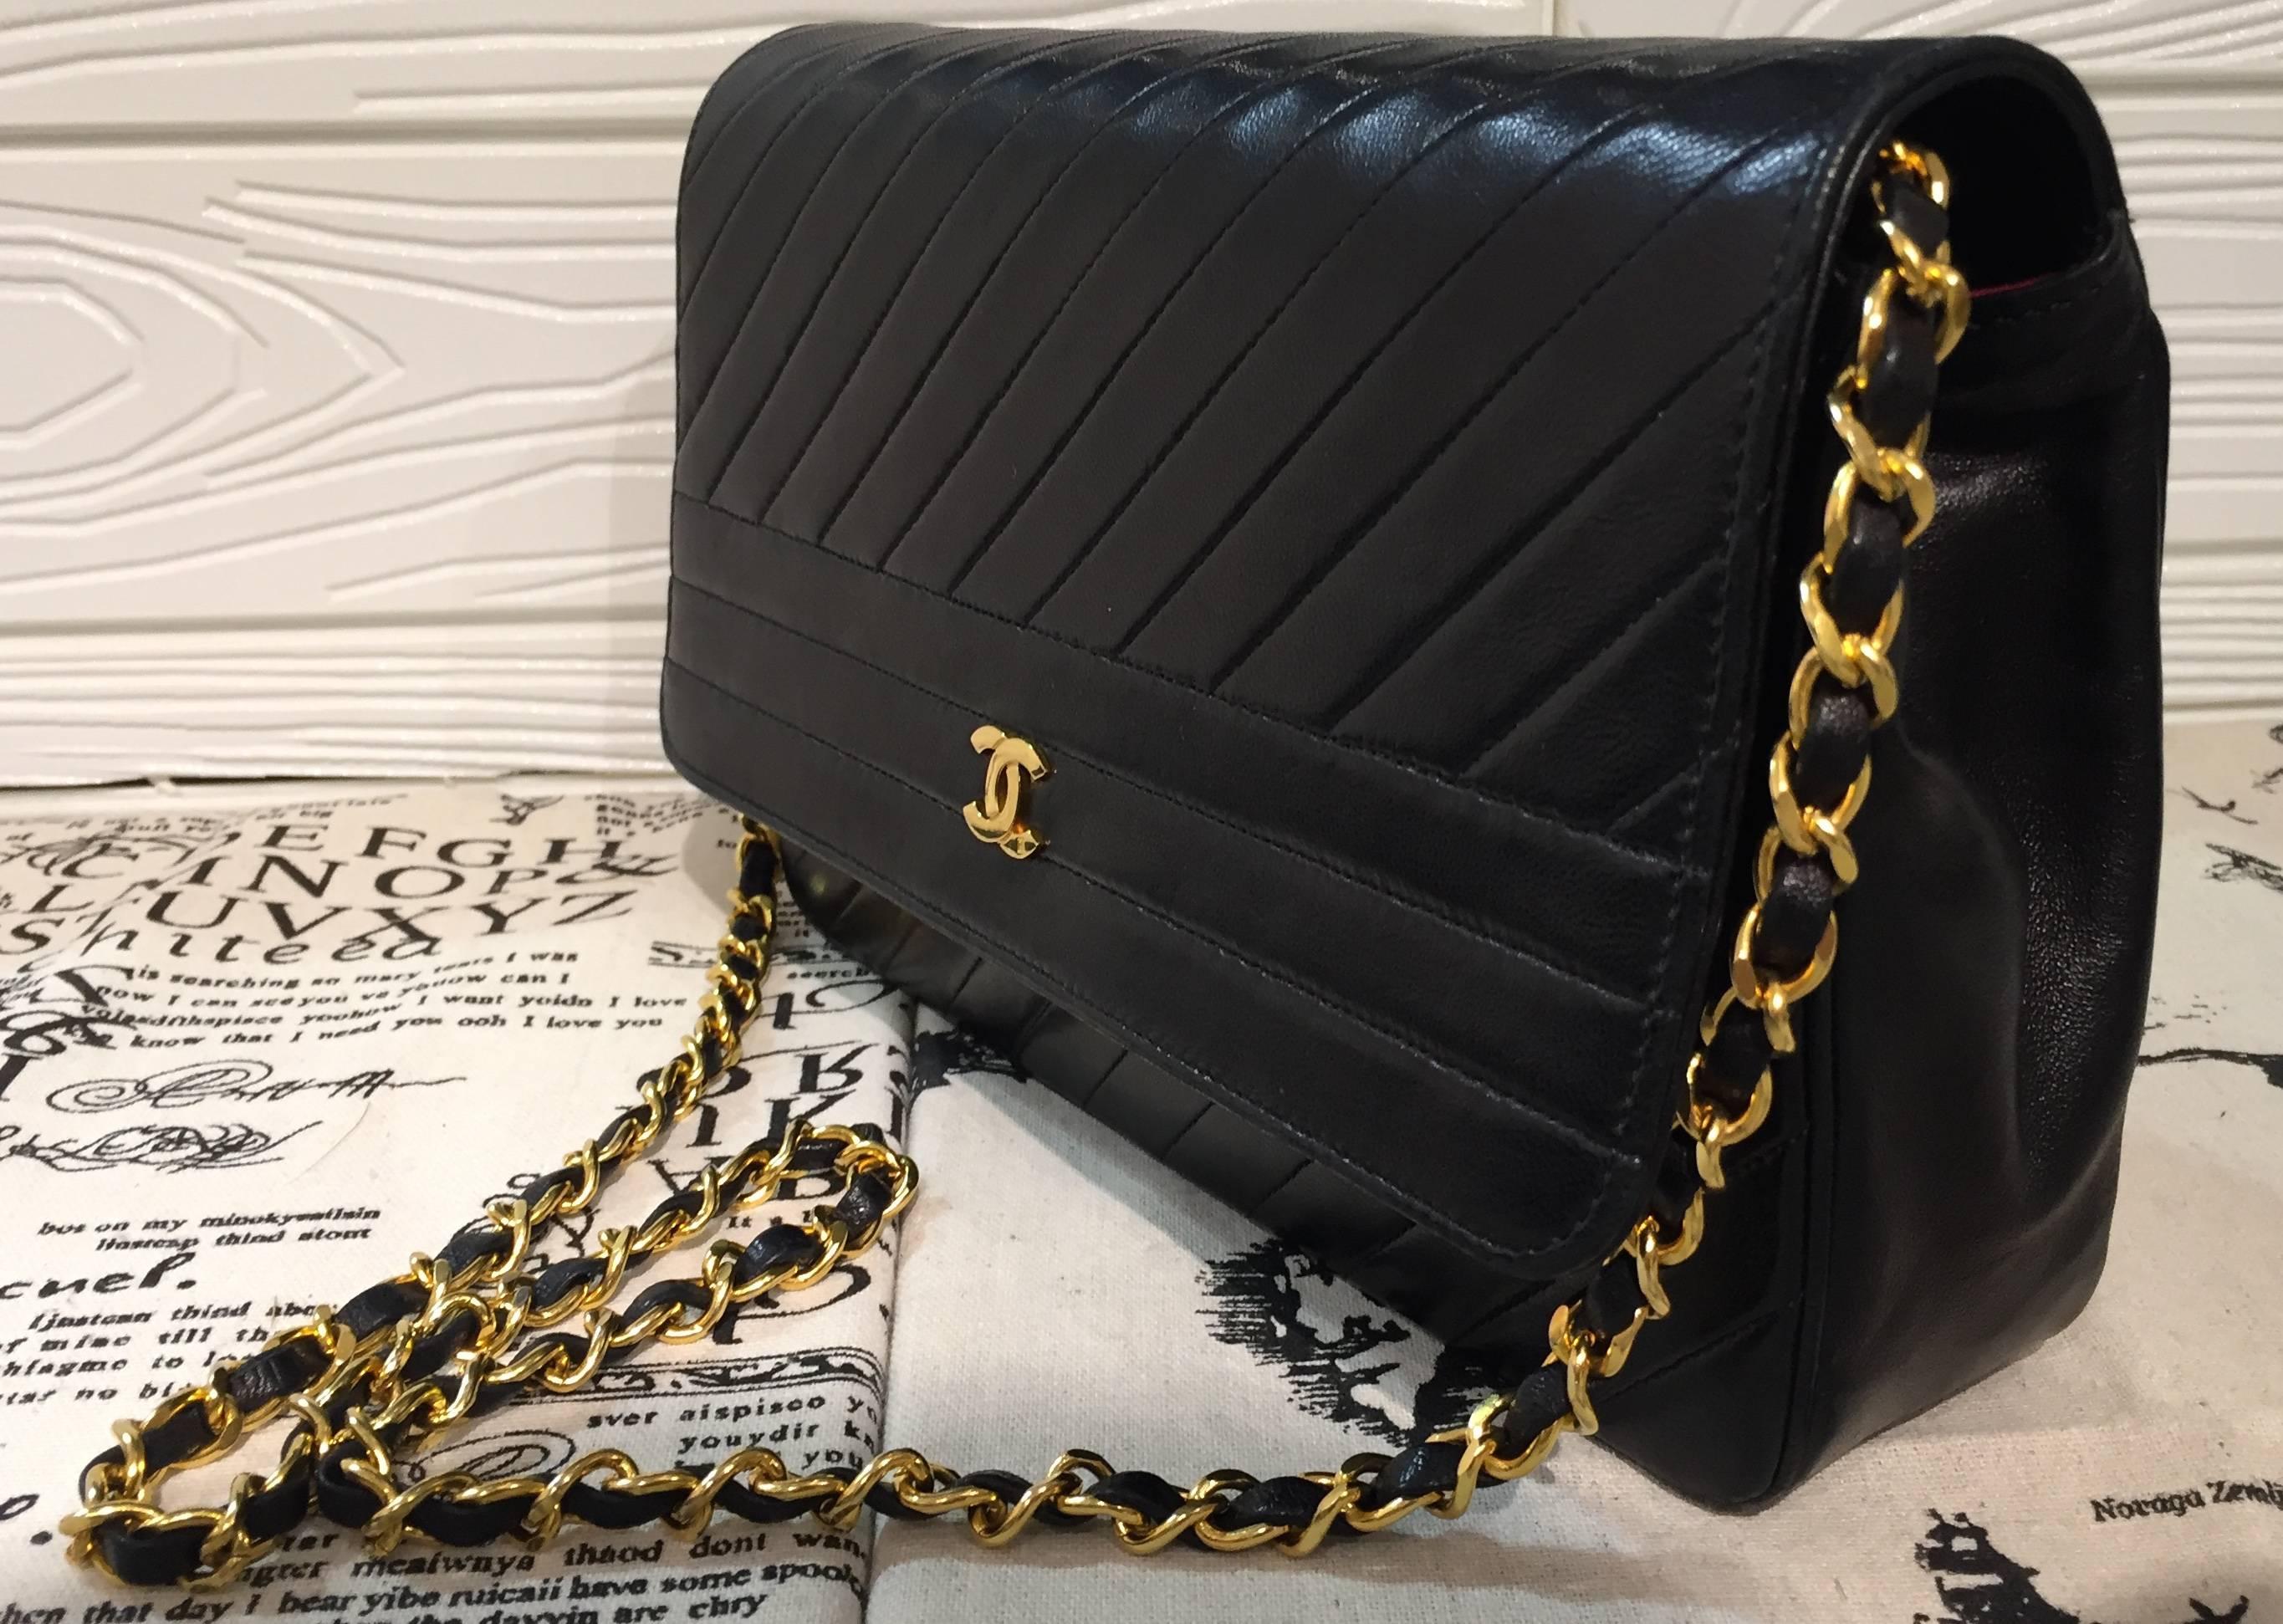 - Vintage 90s Chanel classic black lambskin quilted shoulder bag. 

- Diagonal and horizontal stripes pattern. 

- Gold toned hardware 